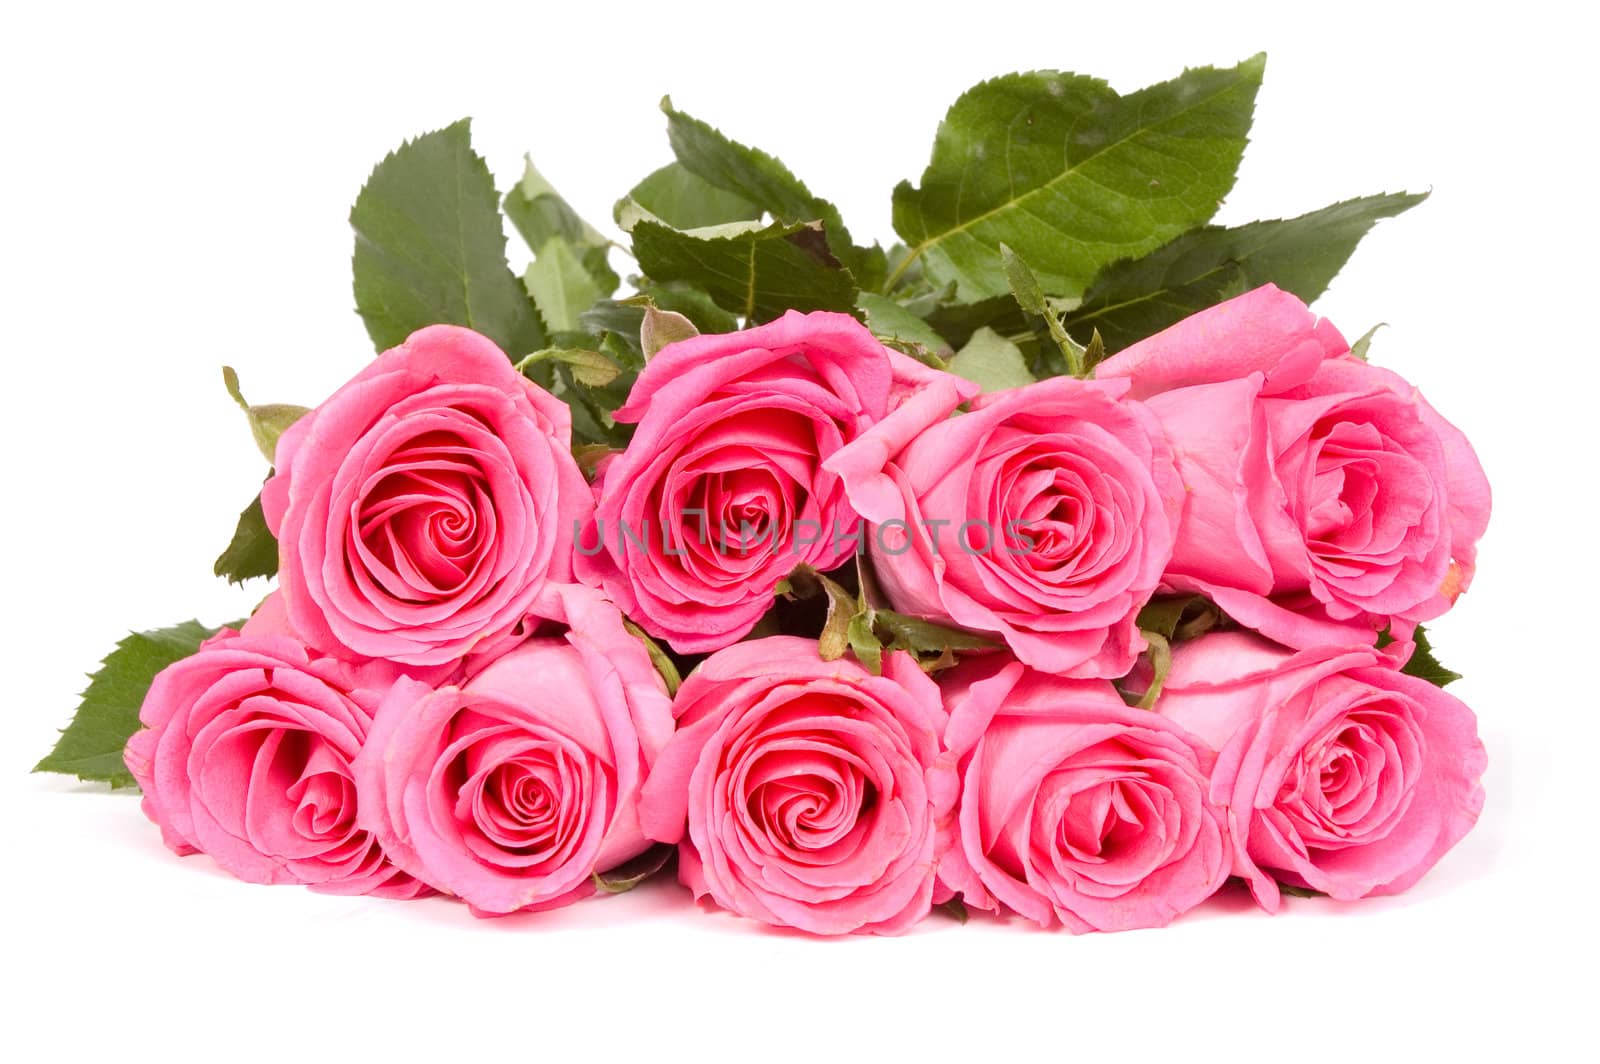 Bunch of pink roses isolated on white